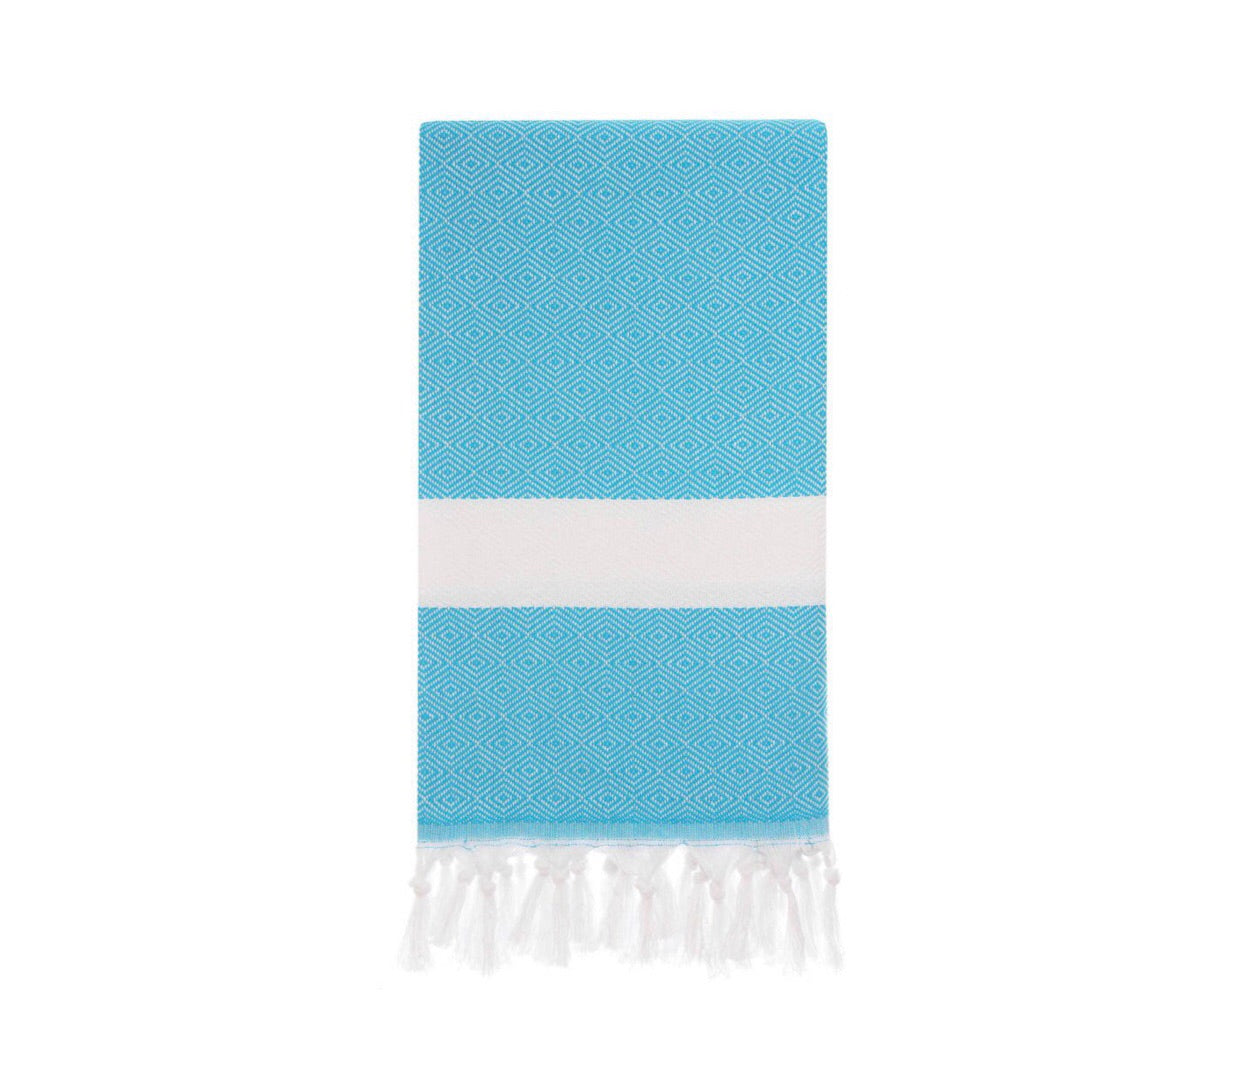 Diamond pattern Turkish towel for beach or bath in turquoise